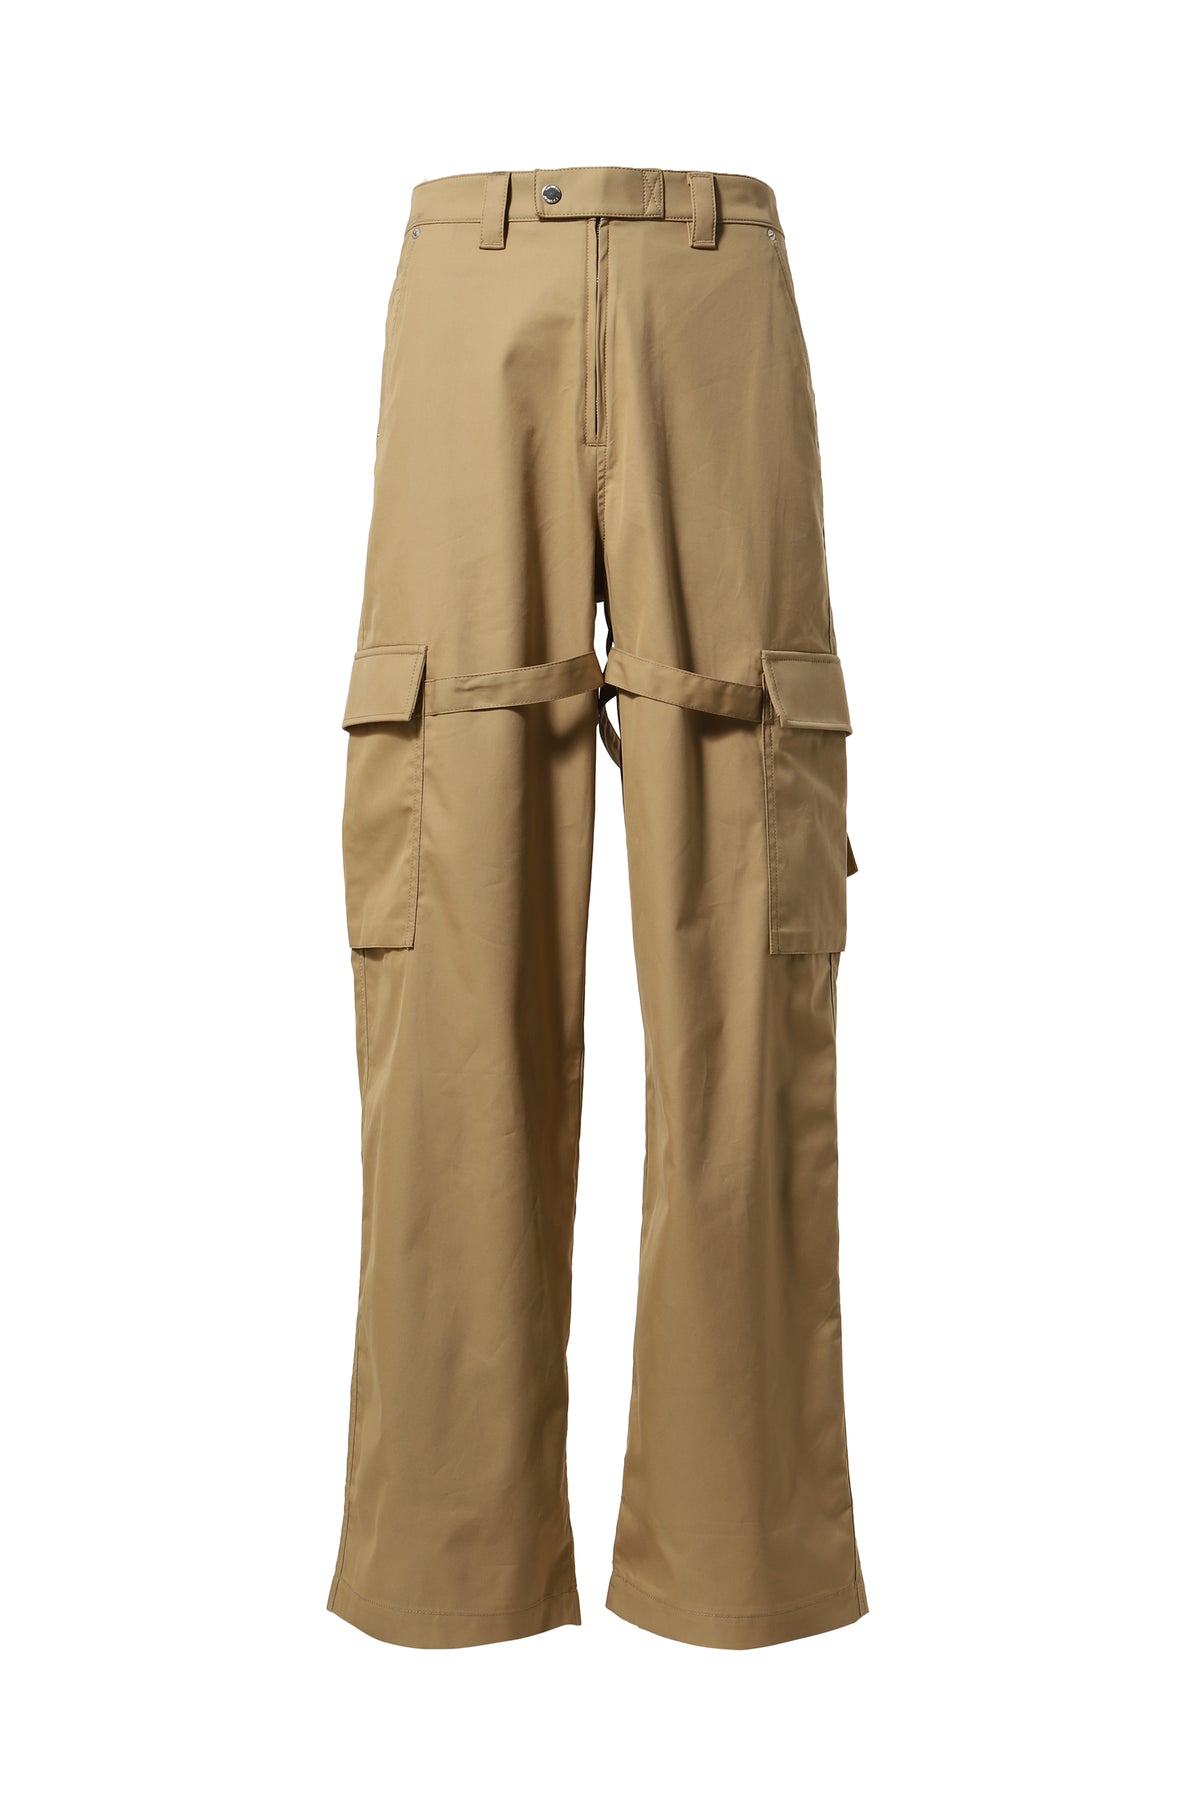 RELAXED FIT CARGO PANTS / BEI